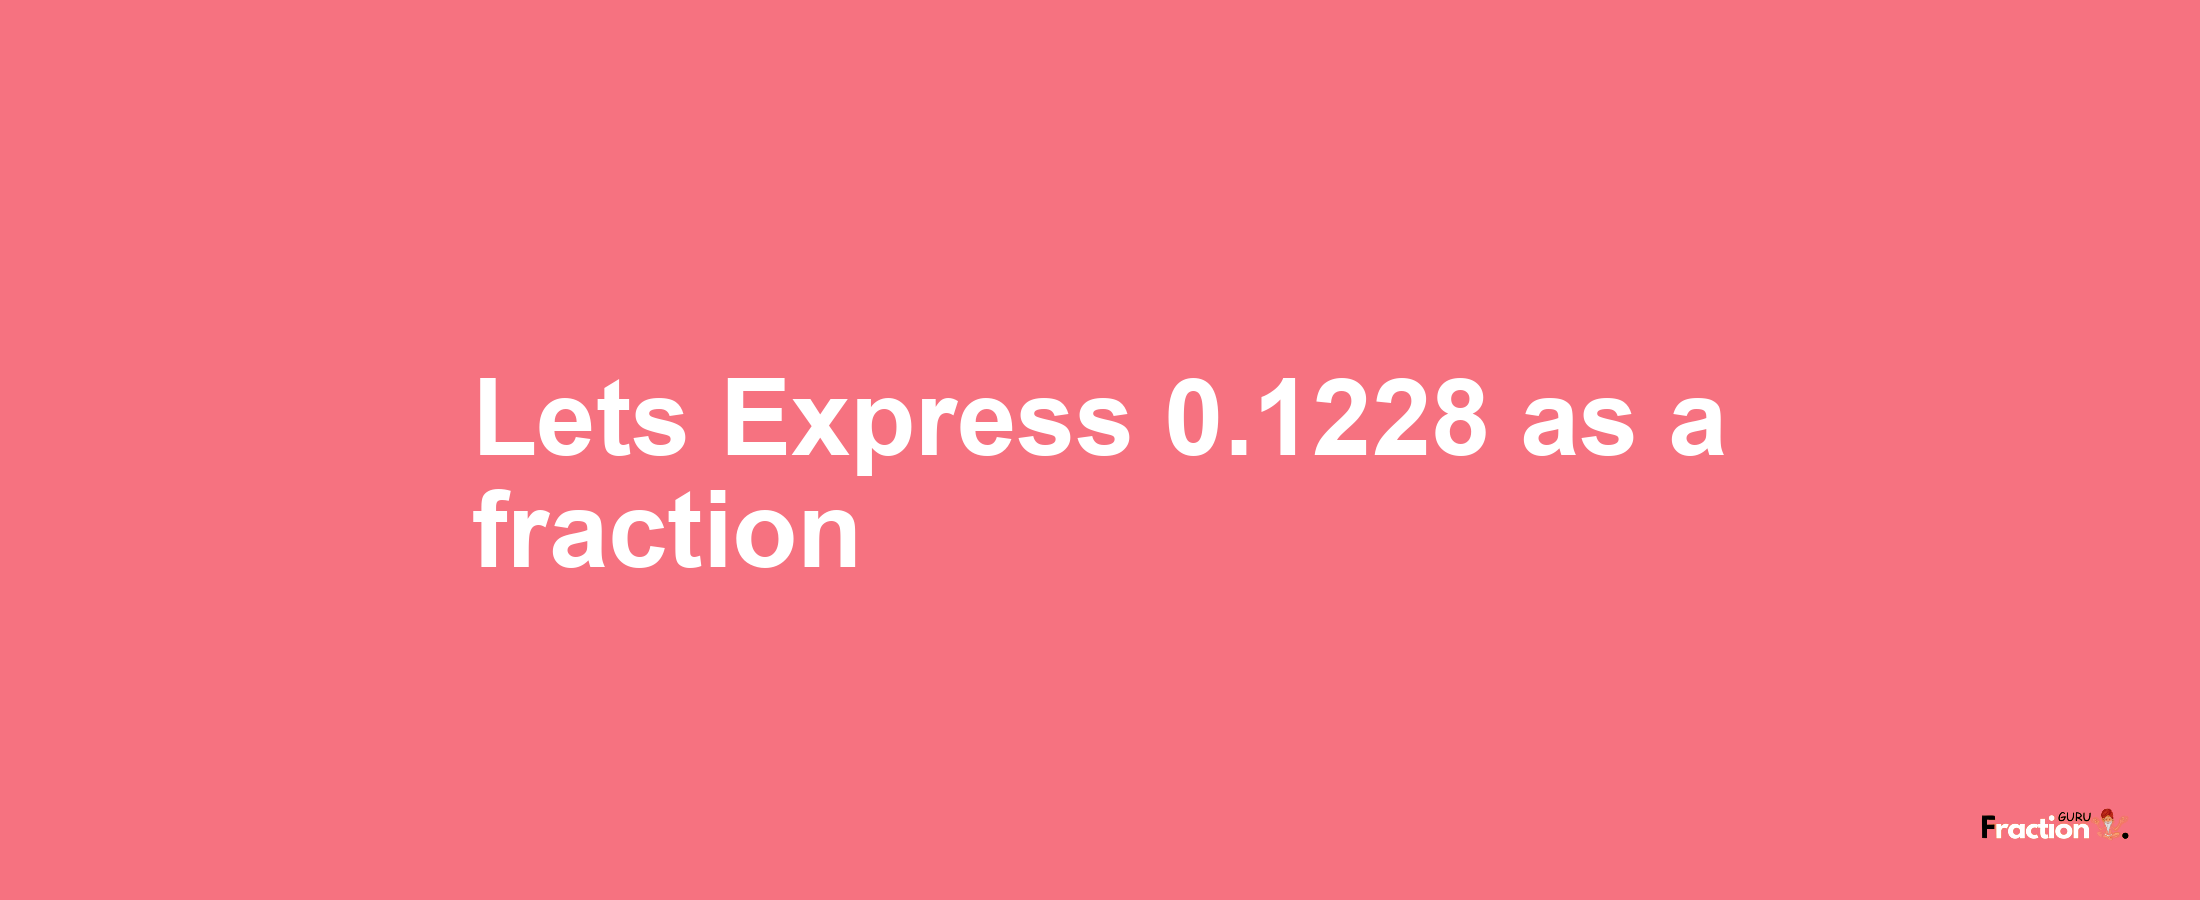 Lets Express 0.1228 as afraction